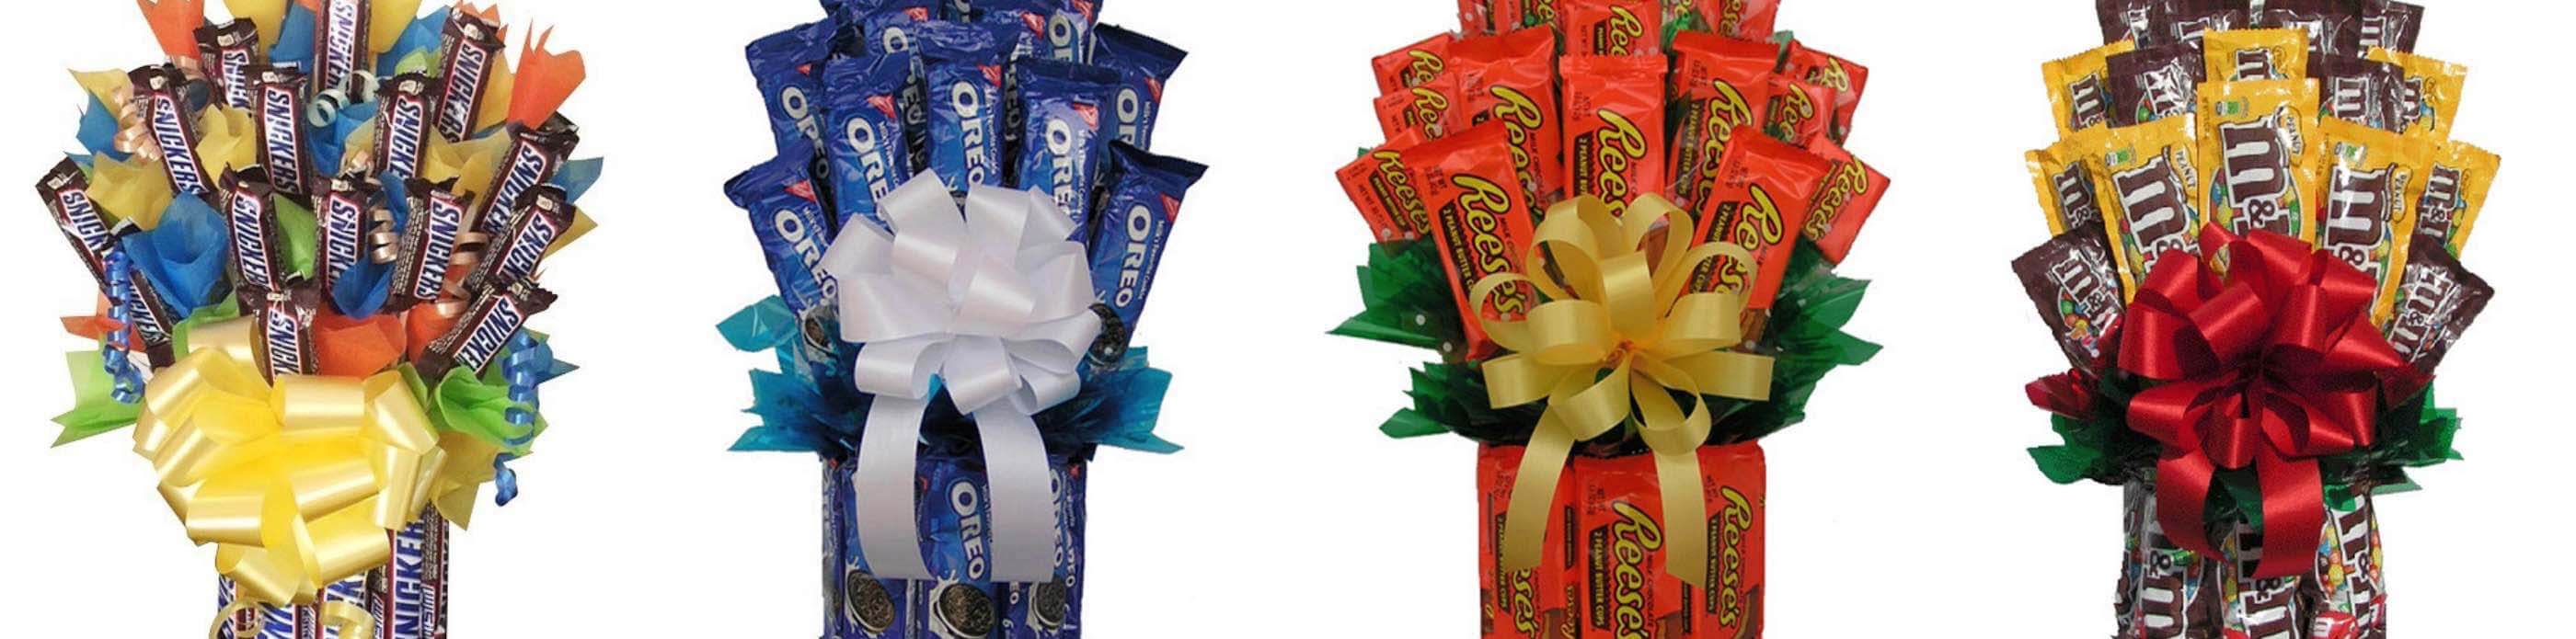 Candy Bouquet Philippines